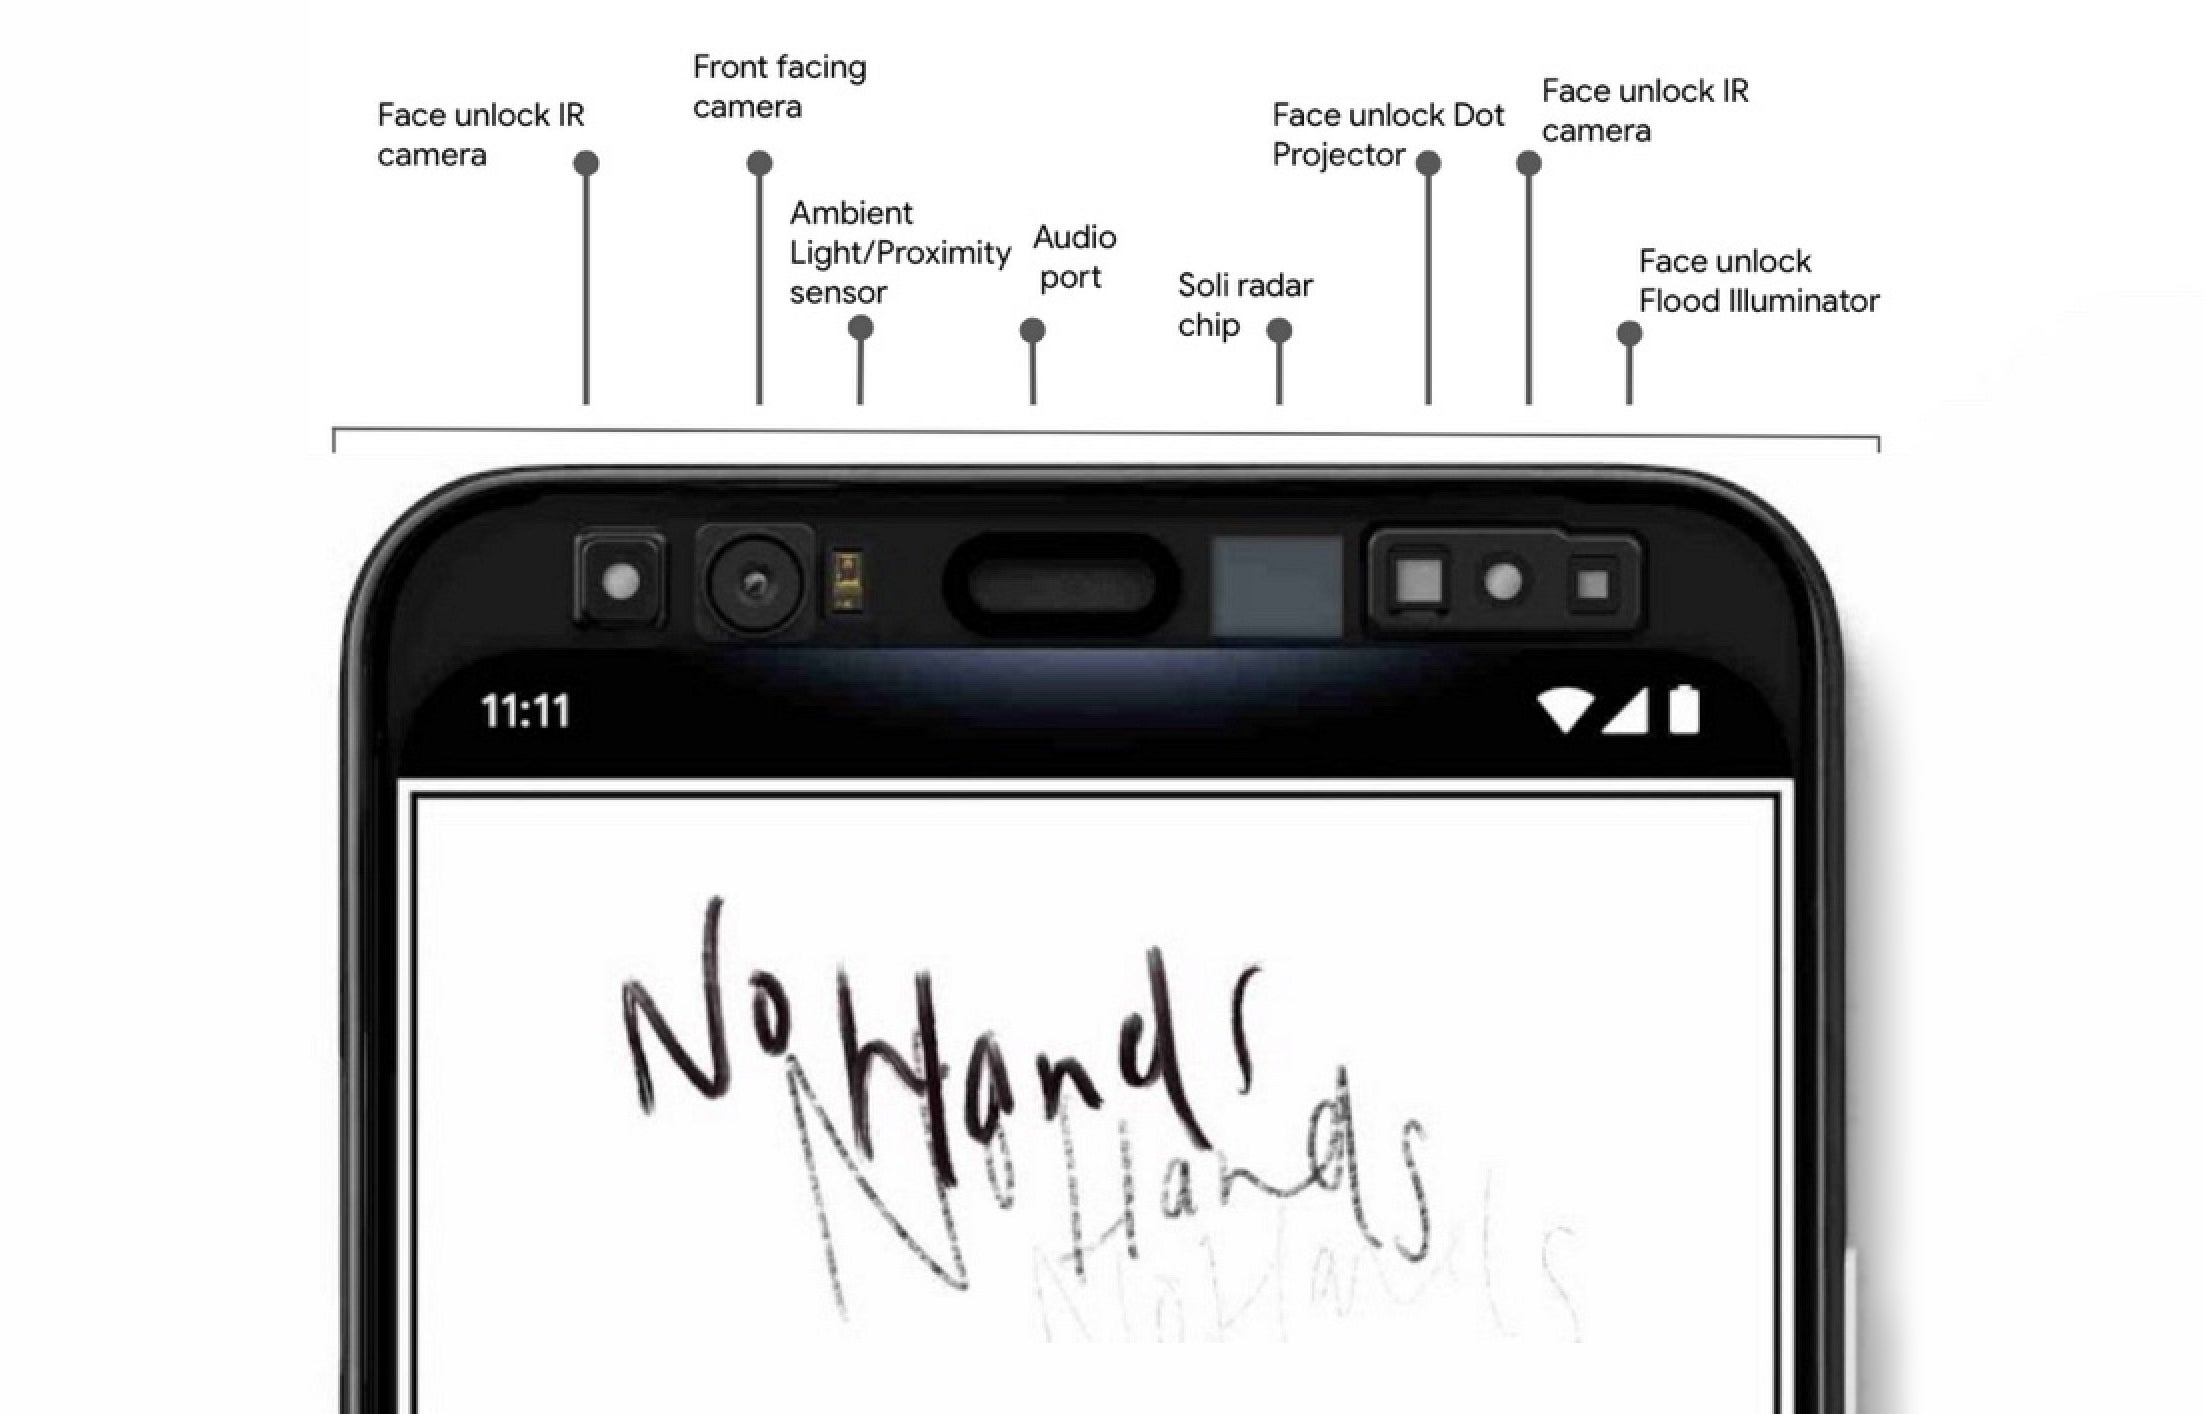 The Pixel 4 will have a 3D face unlock system and Motion Sense navigation that will let you control the device via hand gestures - Google Pixel 4 and Pixel 4 XL rumor review: Design, specs, camera, price and release date